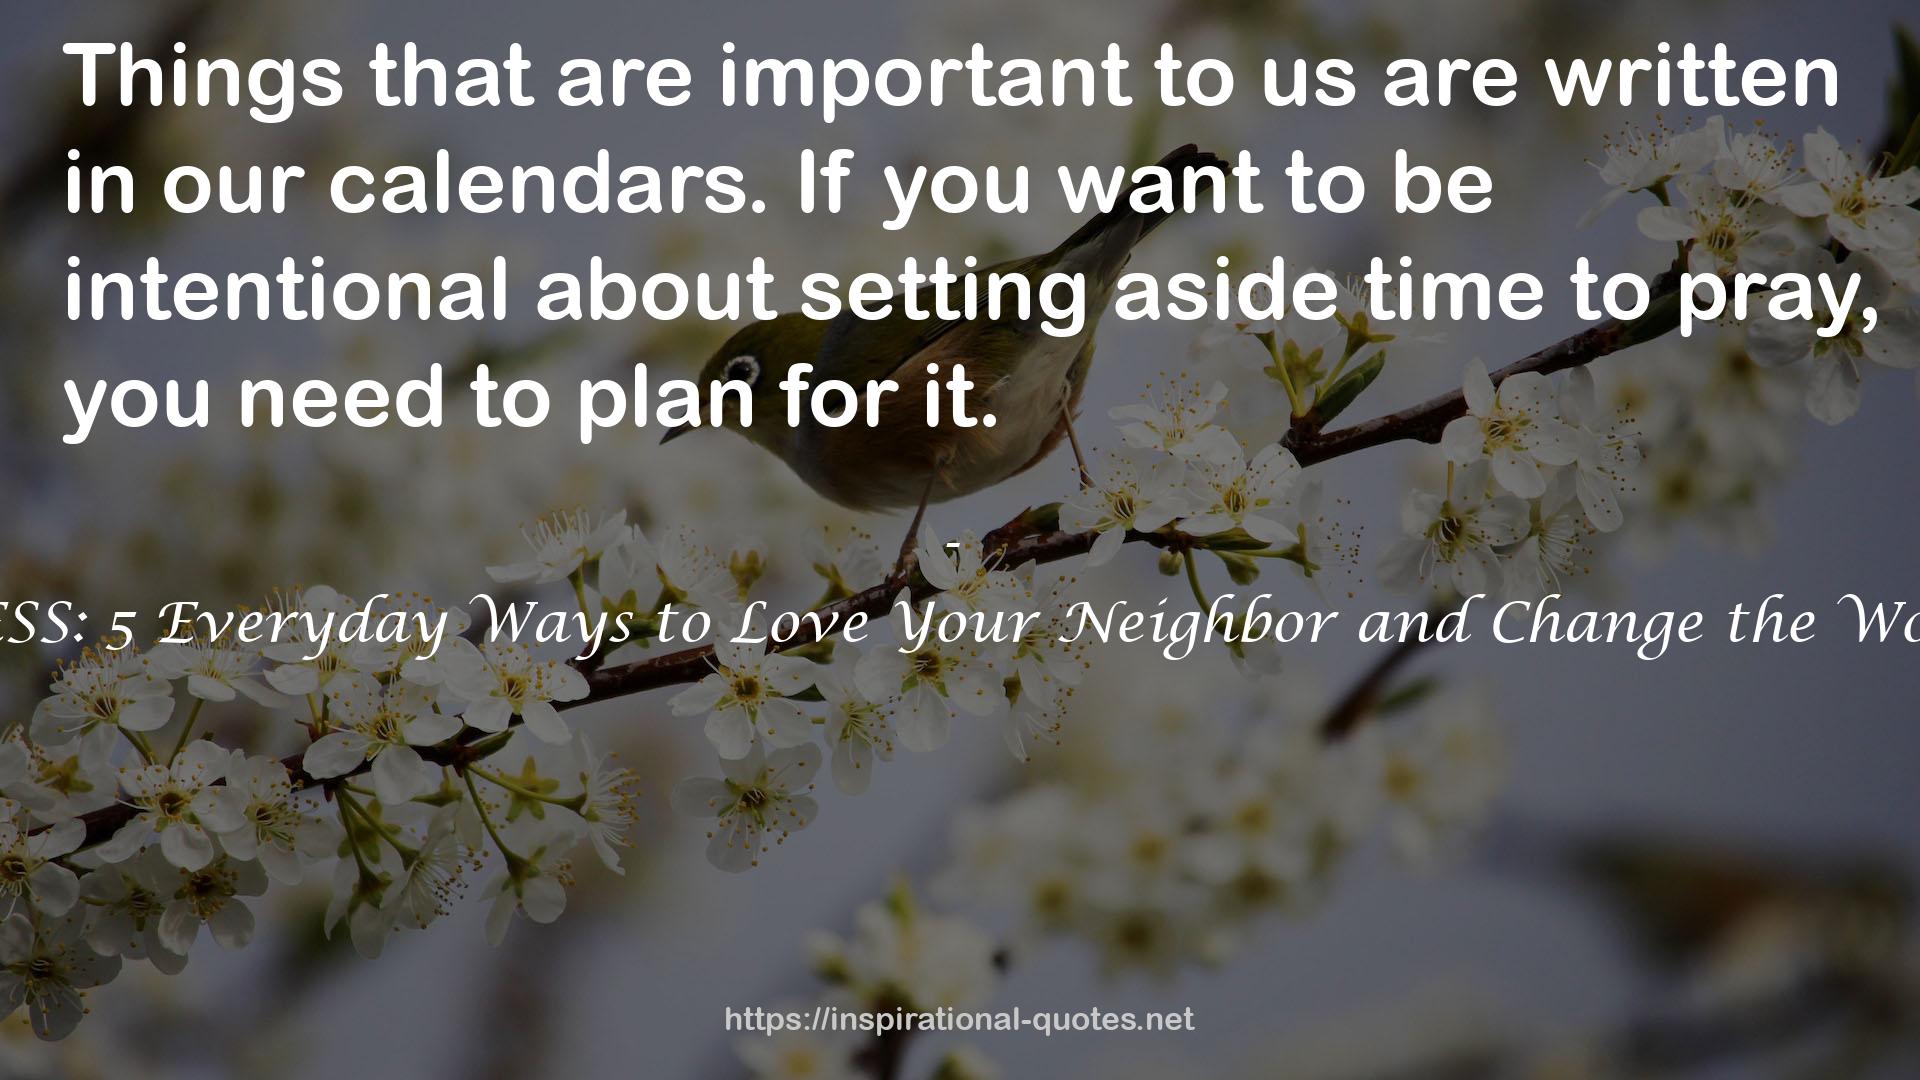 BLESS: 5 Everyday Ways to Love Your Neighbor and Change the World QUOTES